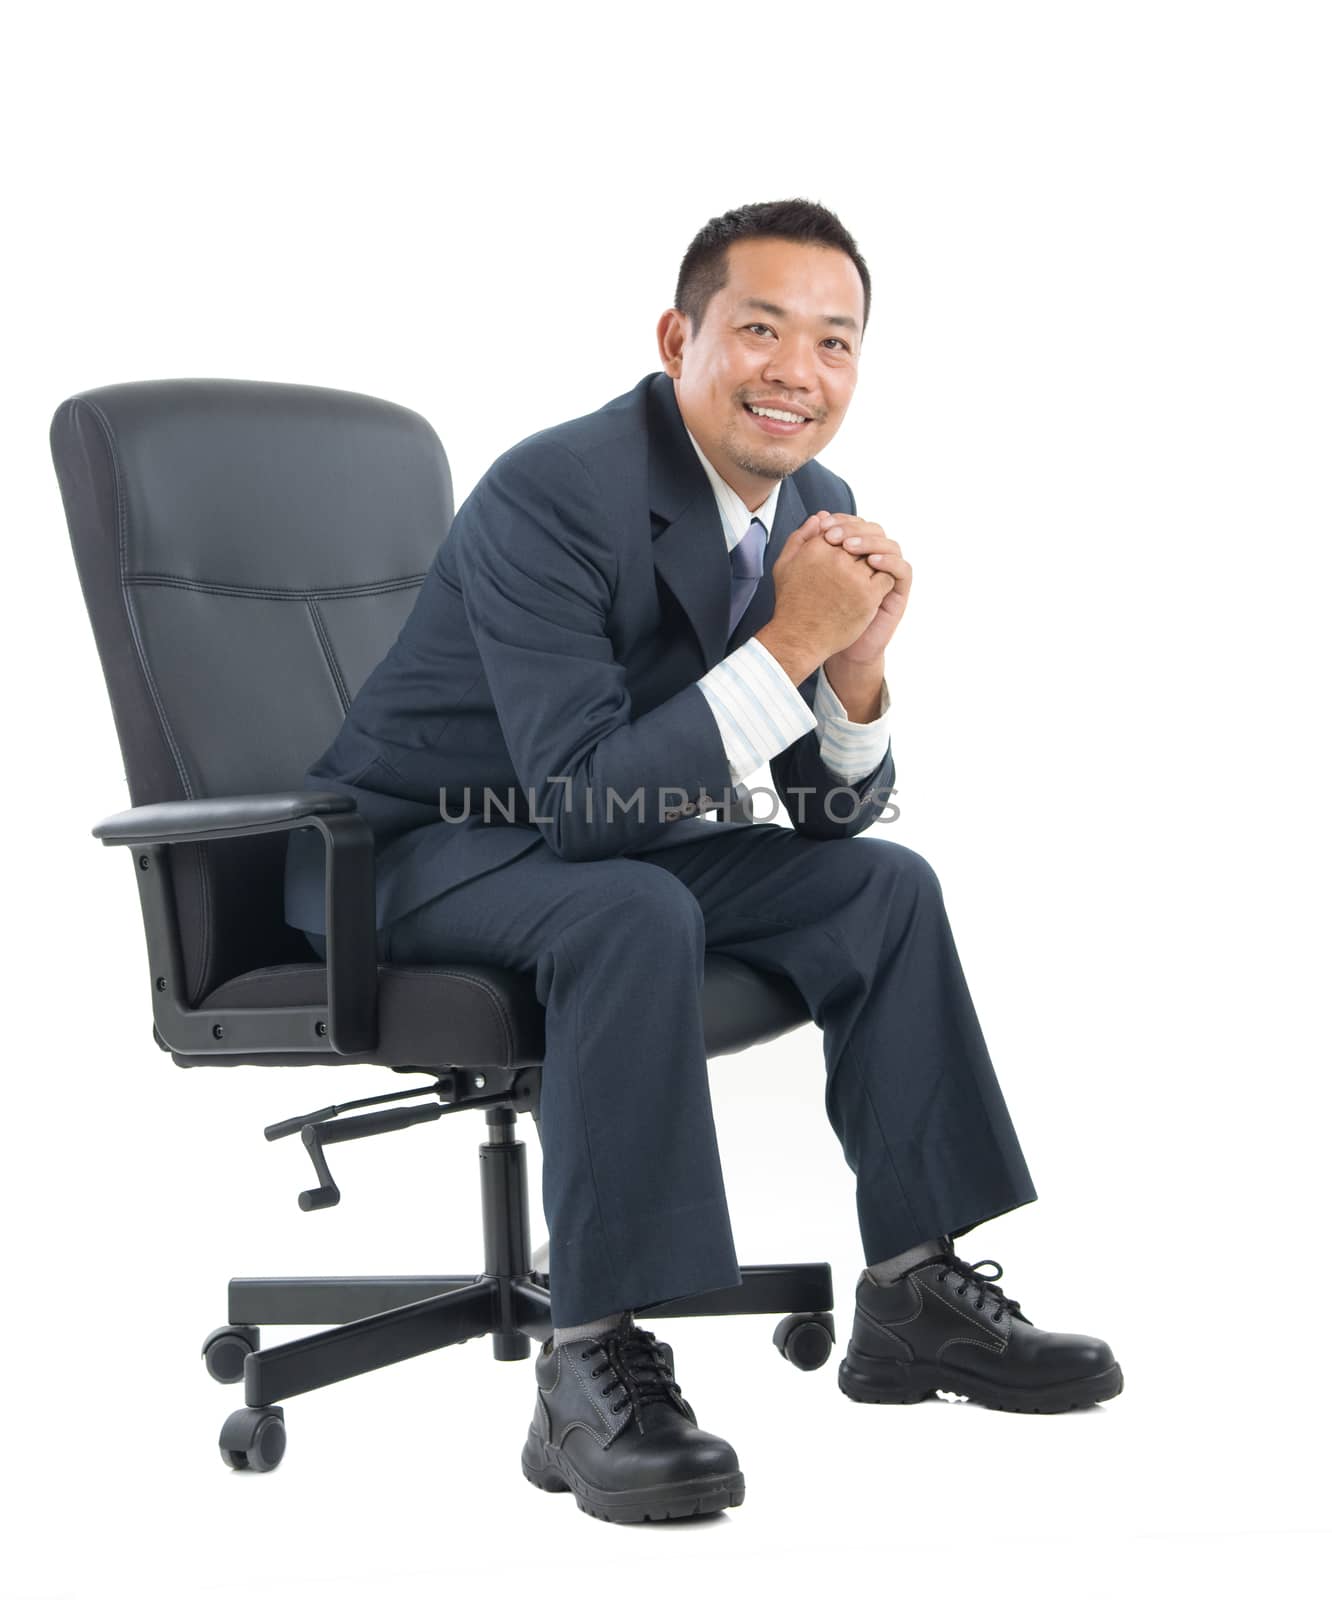 Full body Asian business man seated on chair, arms crossed isolated on white background. 